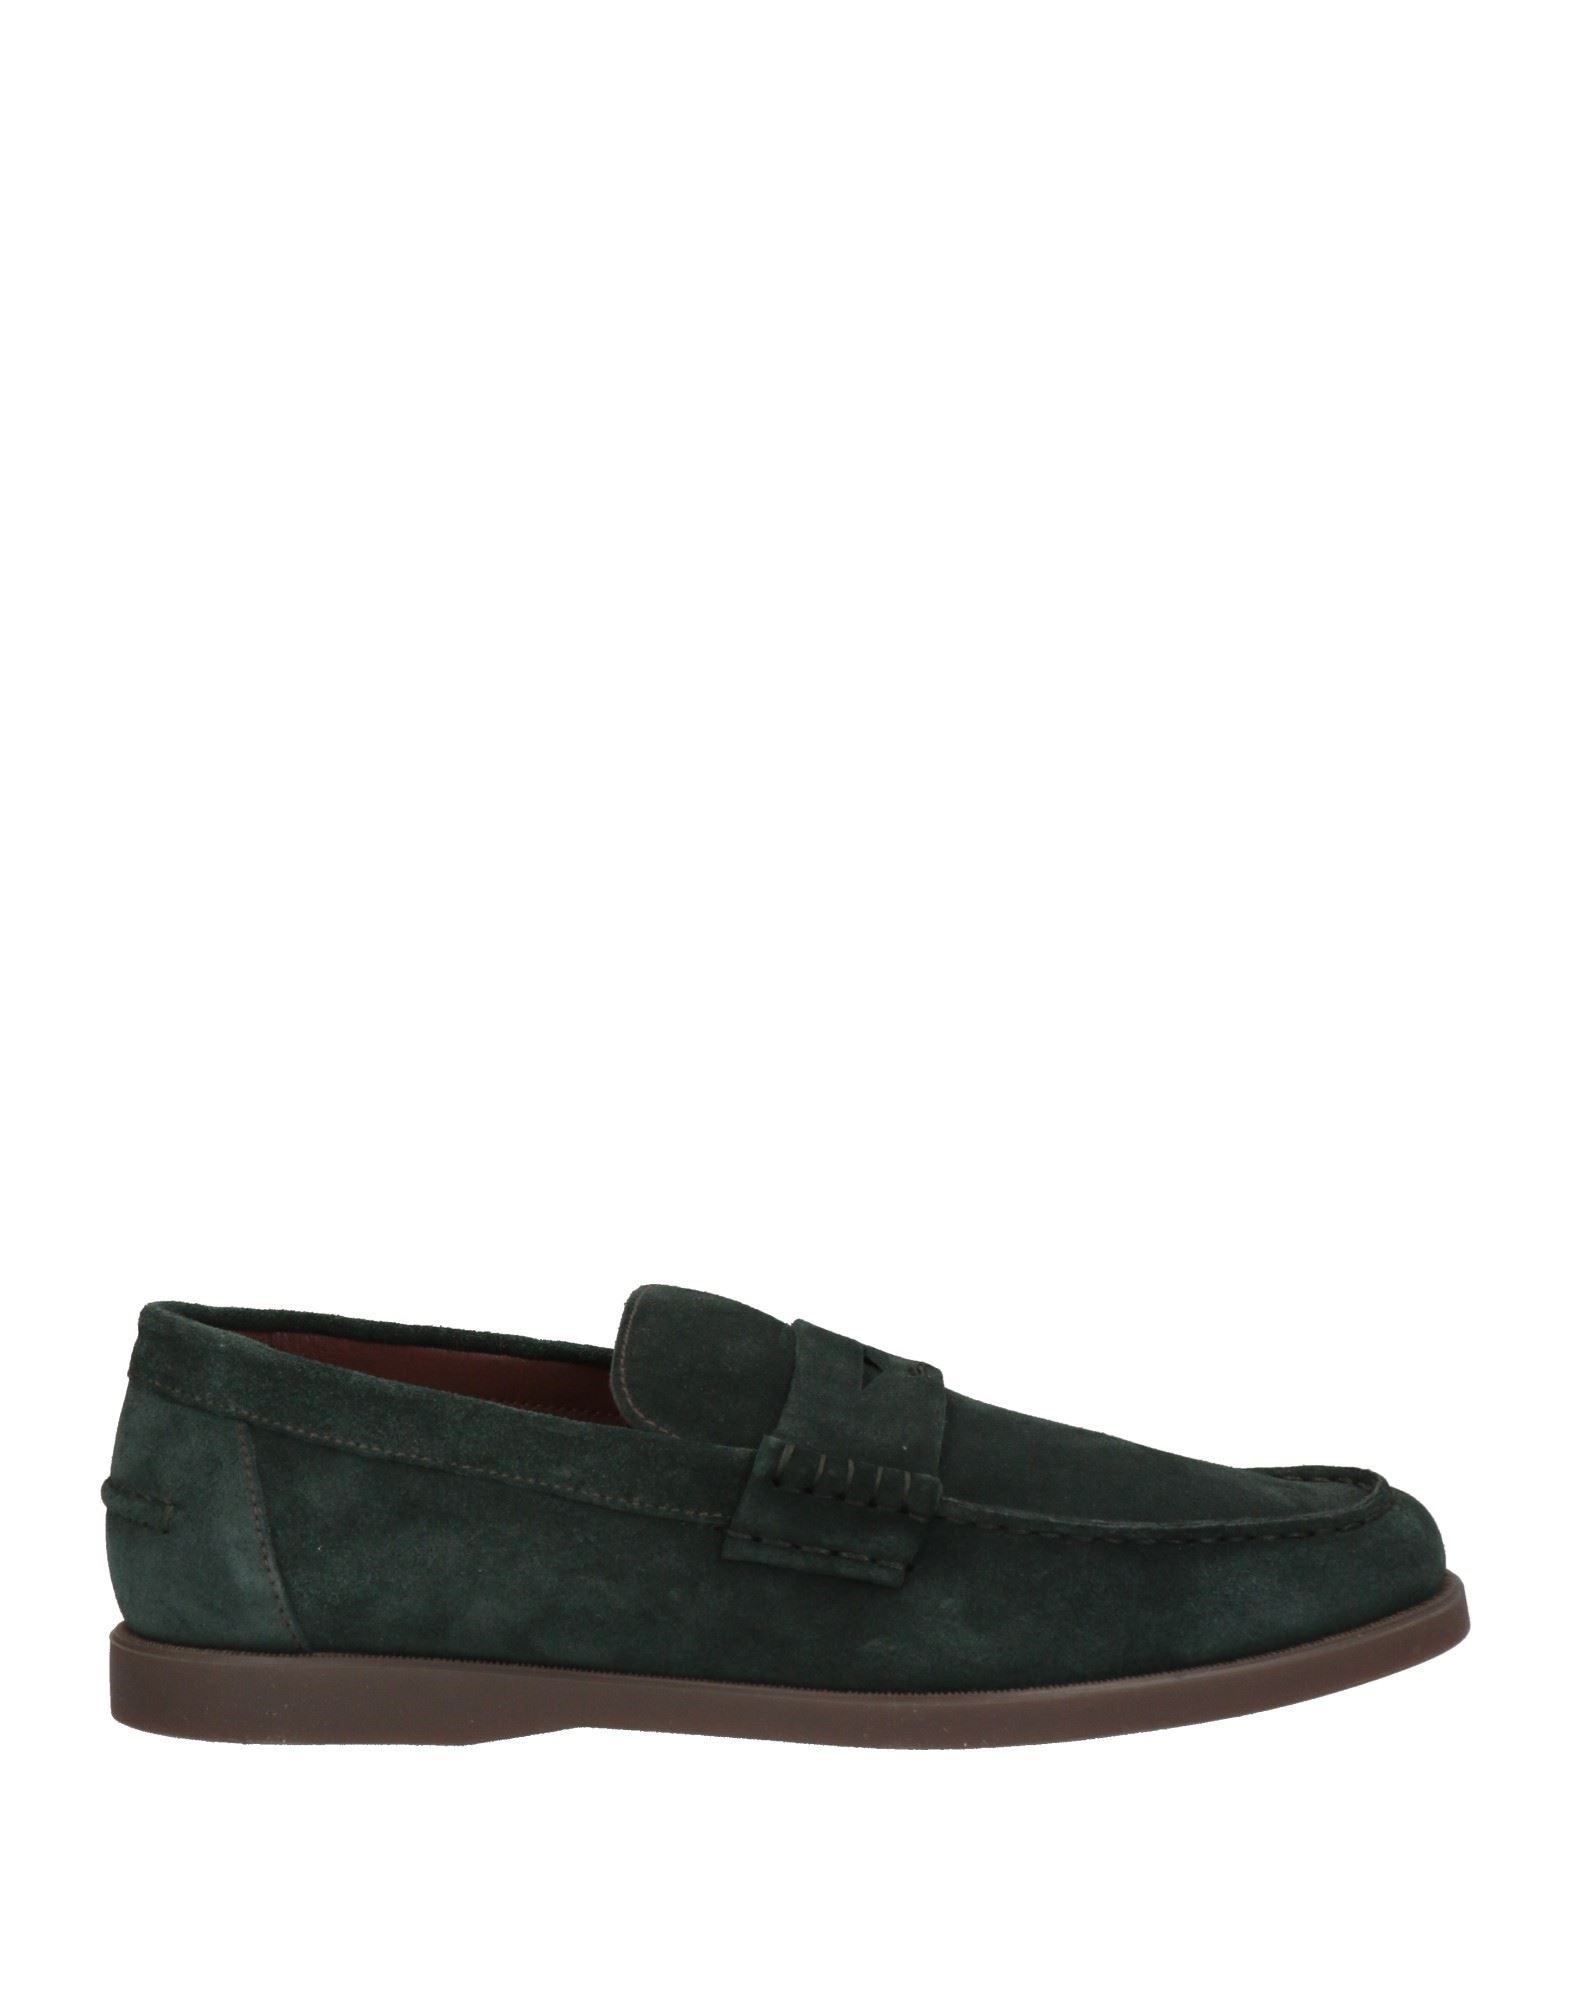 Doucal's Man Loafers Dark Green Size 9.5 Soft Leather